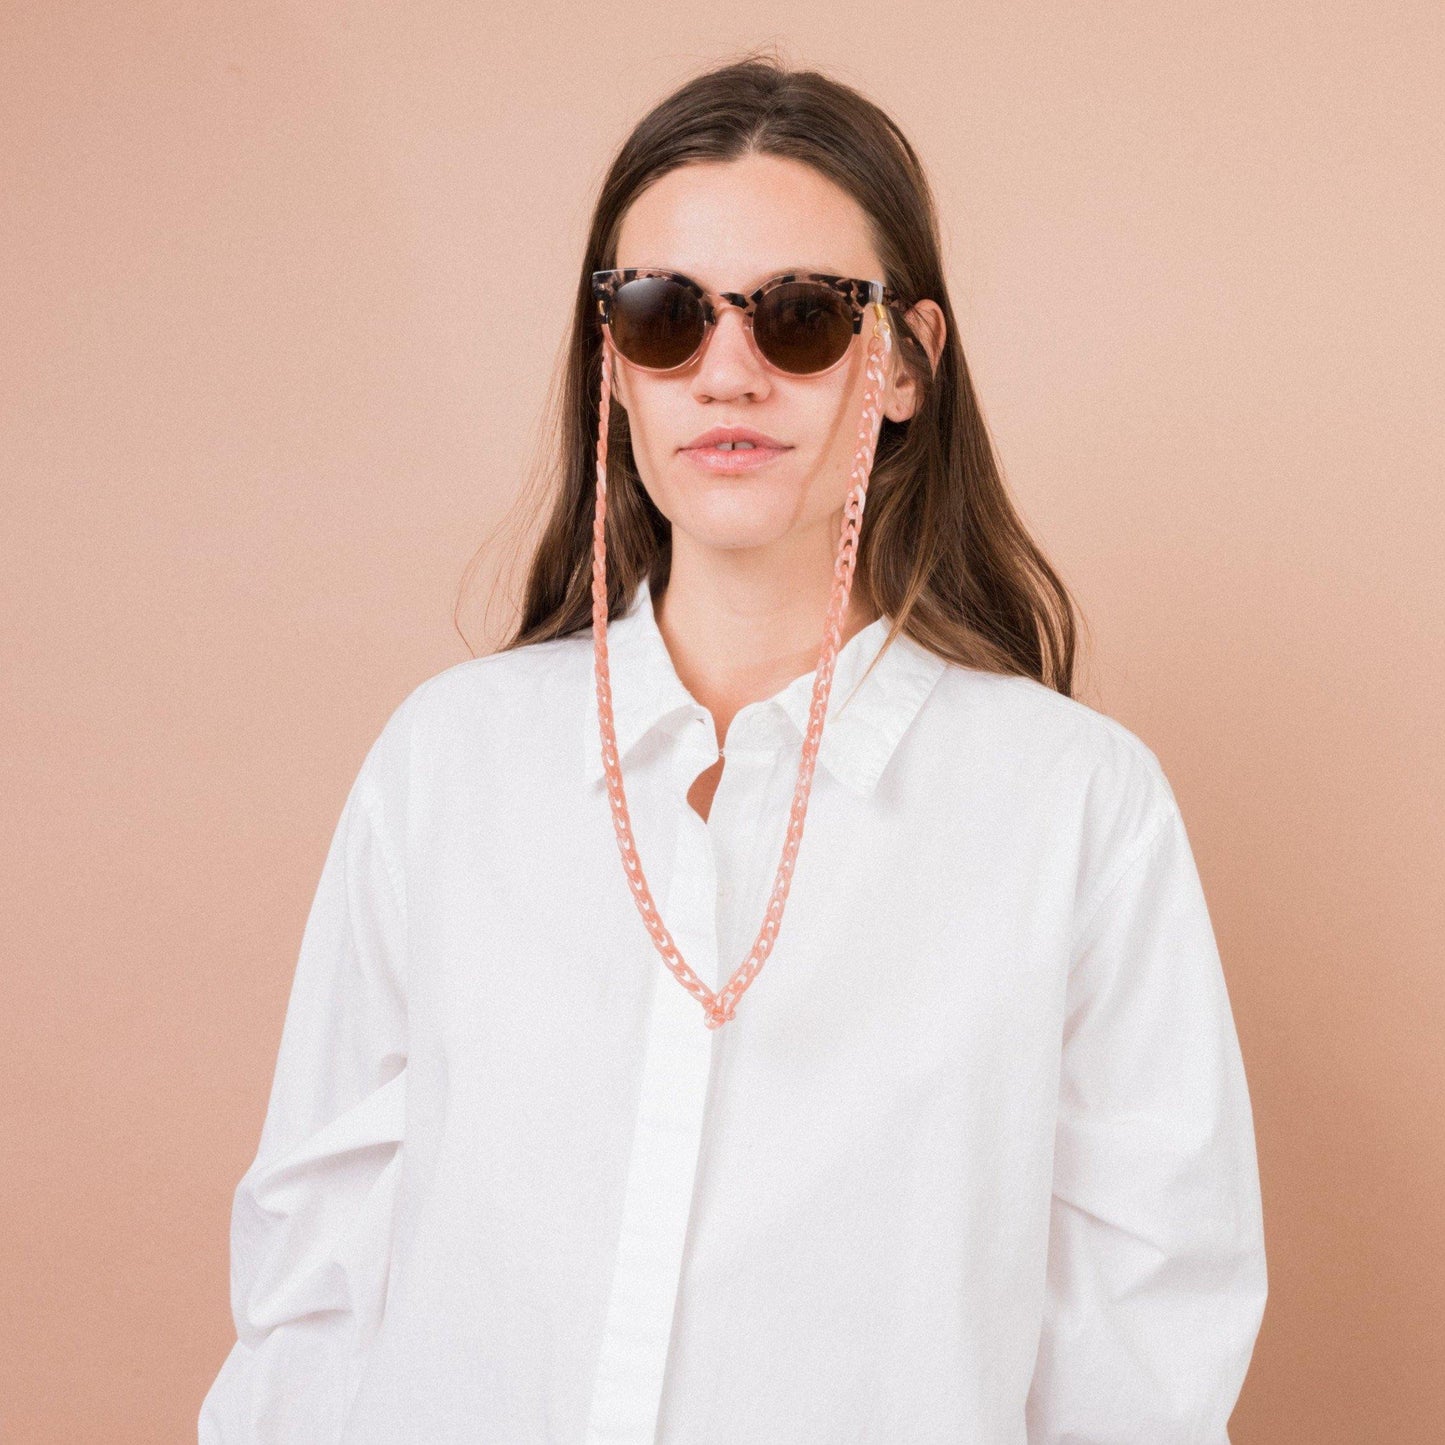 Chunky Blush (Sun) Glasses Chain - Closed Caption | Shop Vintage + Handmade. Always Sustainable. Never Wasteful.